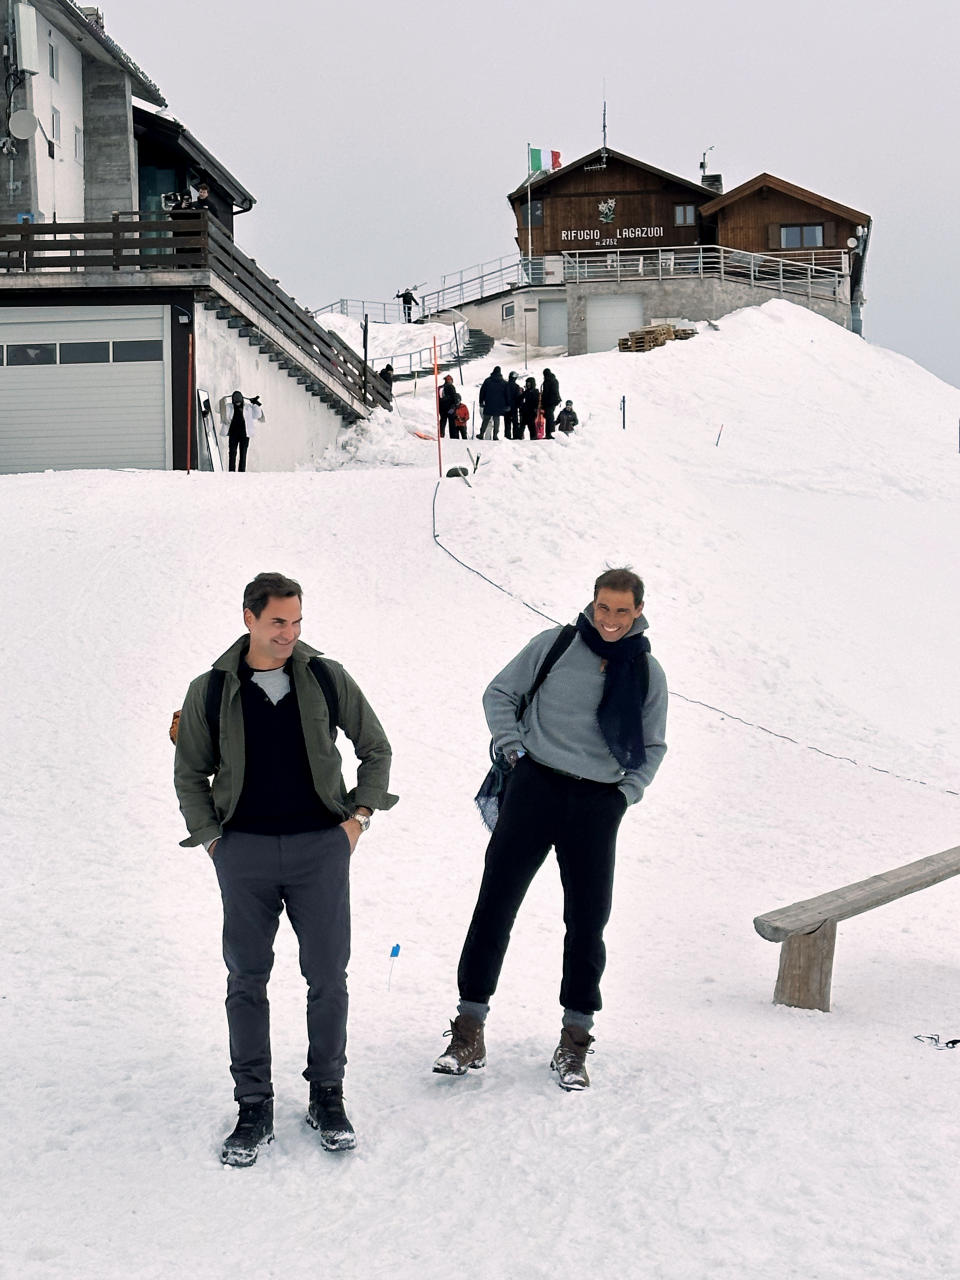 Roger Federer and Rafael Nadal arrive at the mountaintop photo shoot.